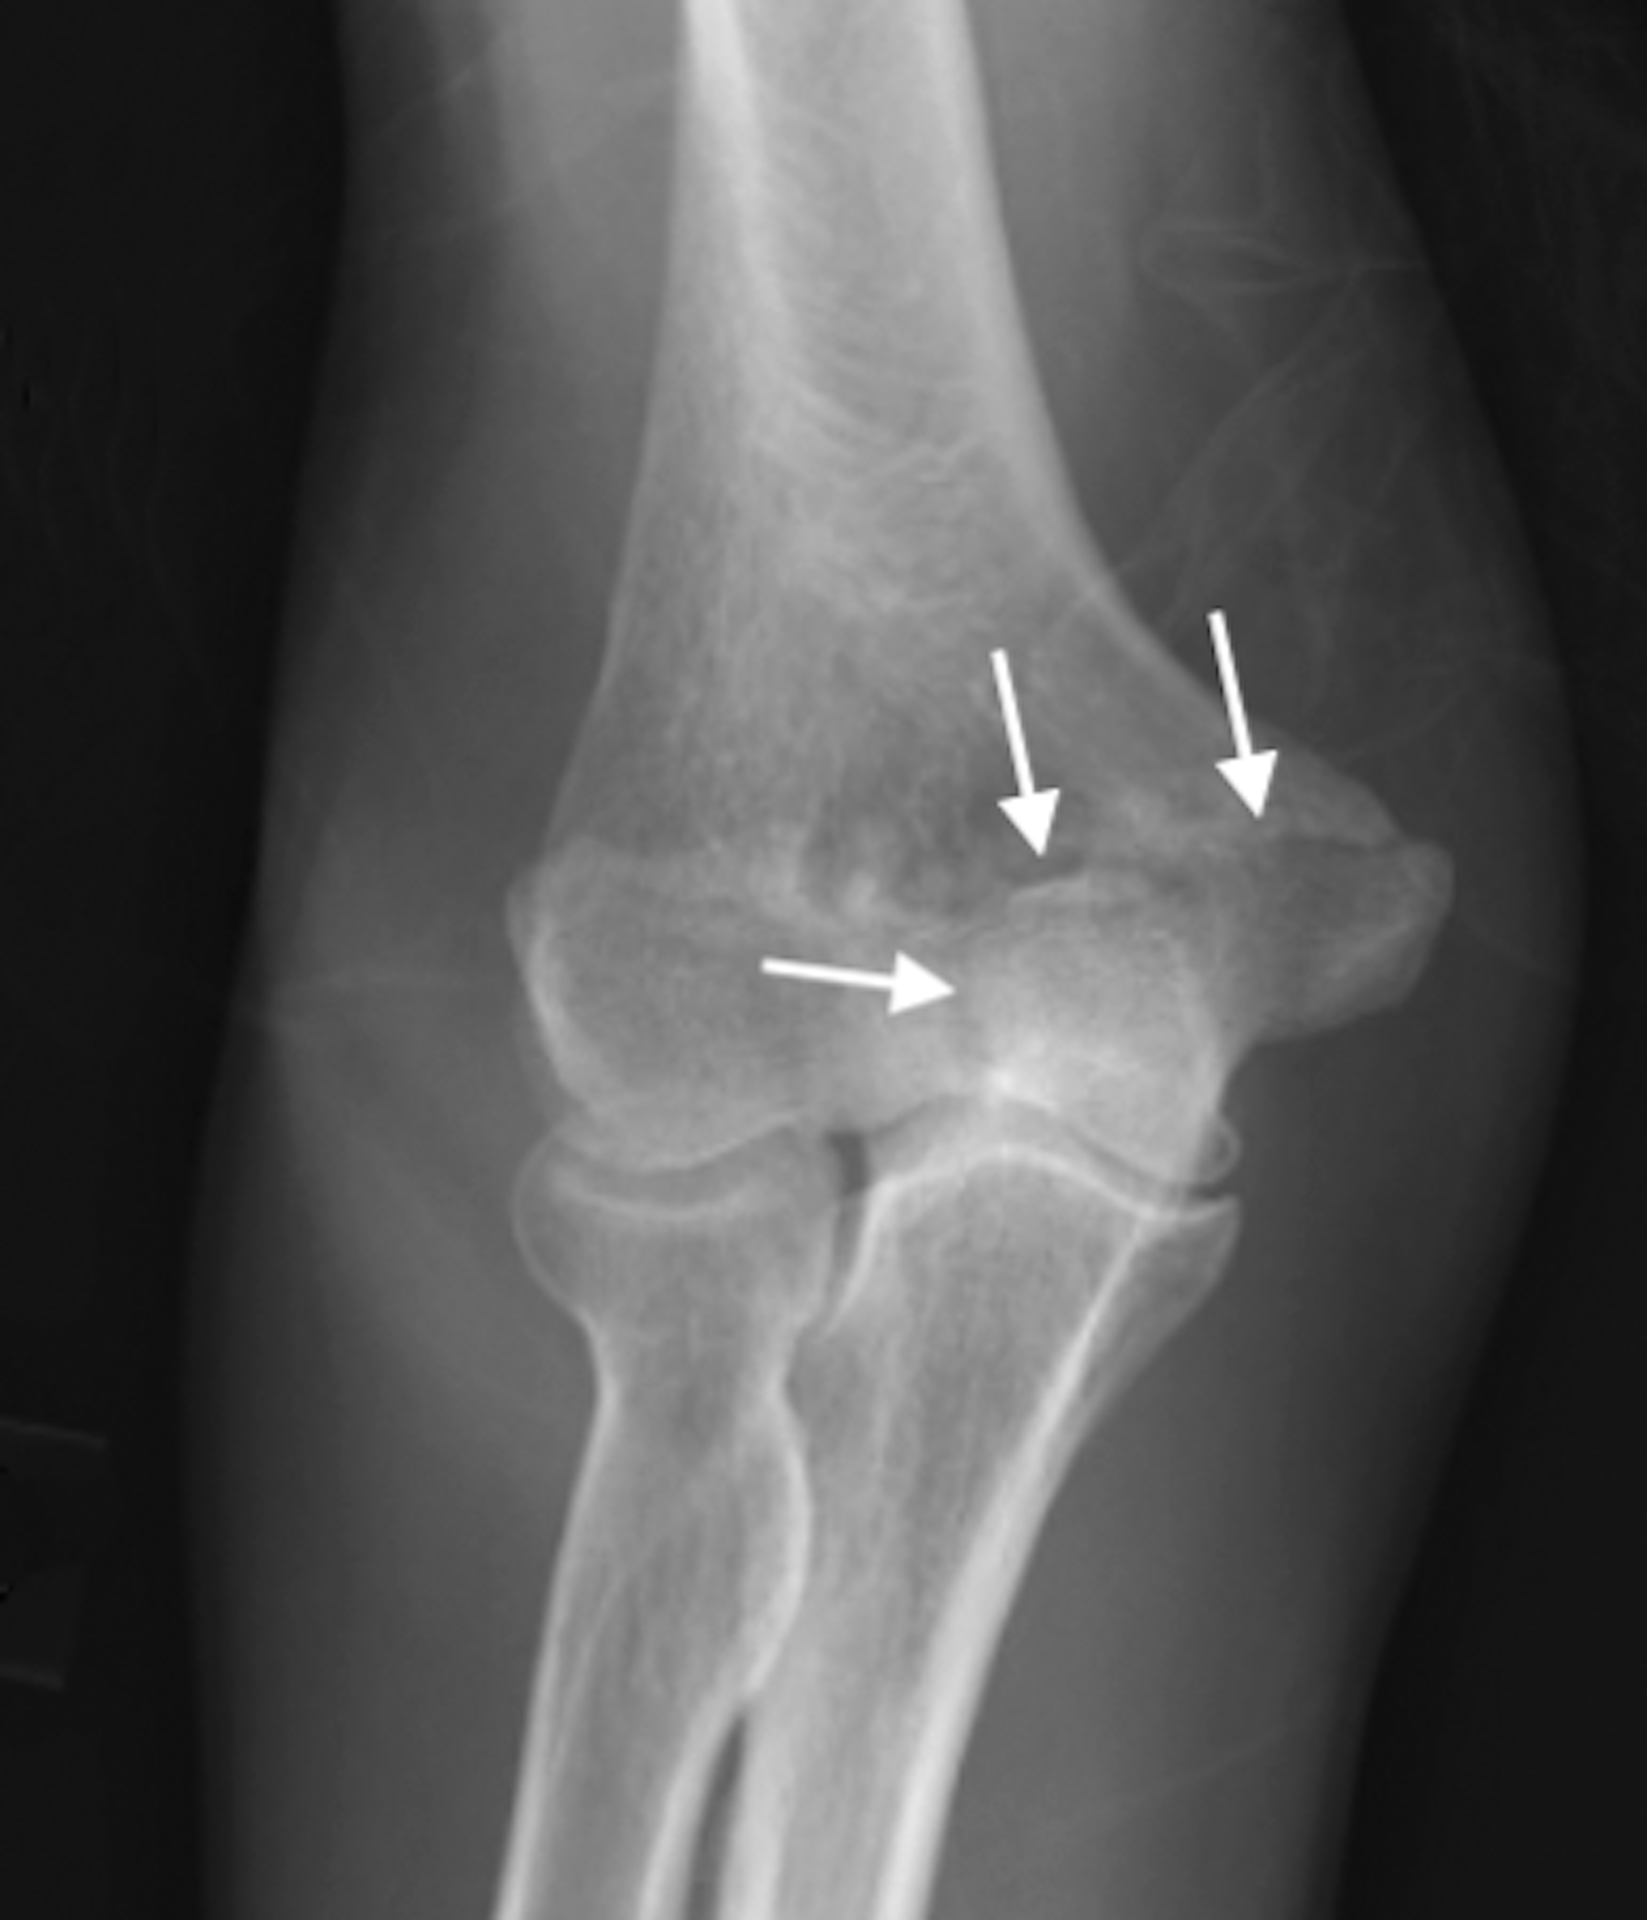 Trochlear Fracture (arrows) as part of a distal humerus fracture